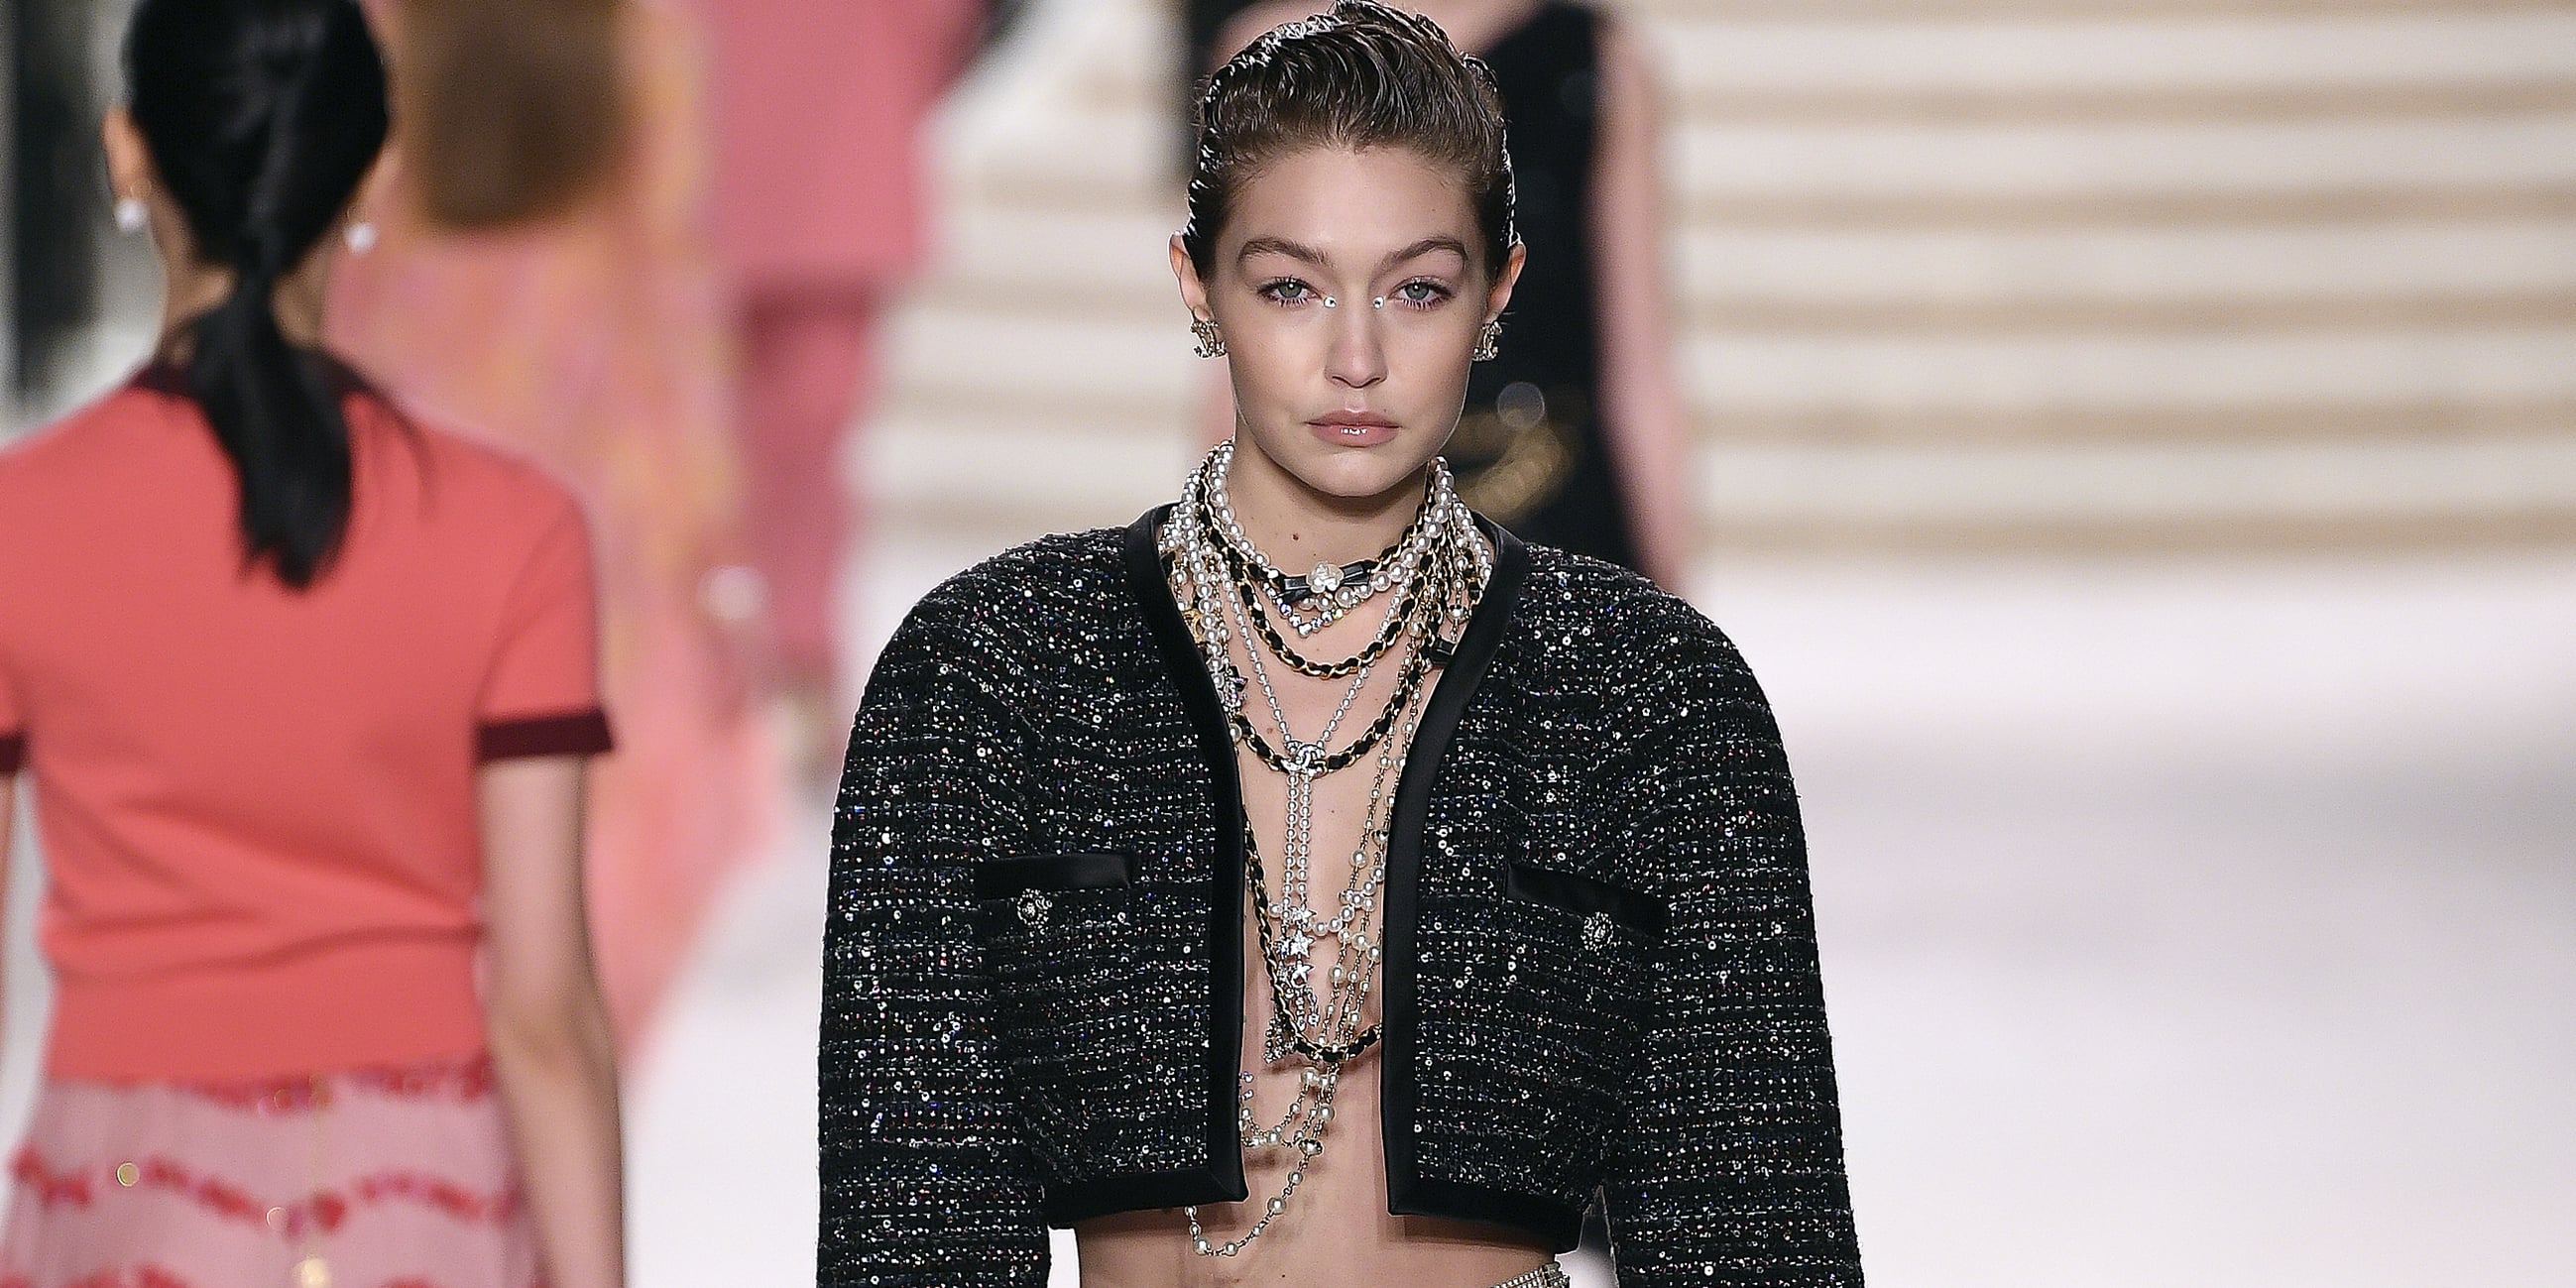 The Louis Vuitton PFW 2020 Front Row Was Filled With Up-and-Comers